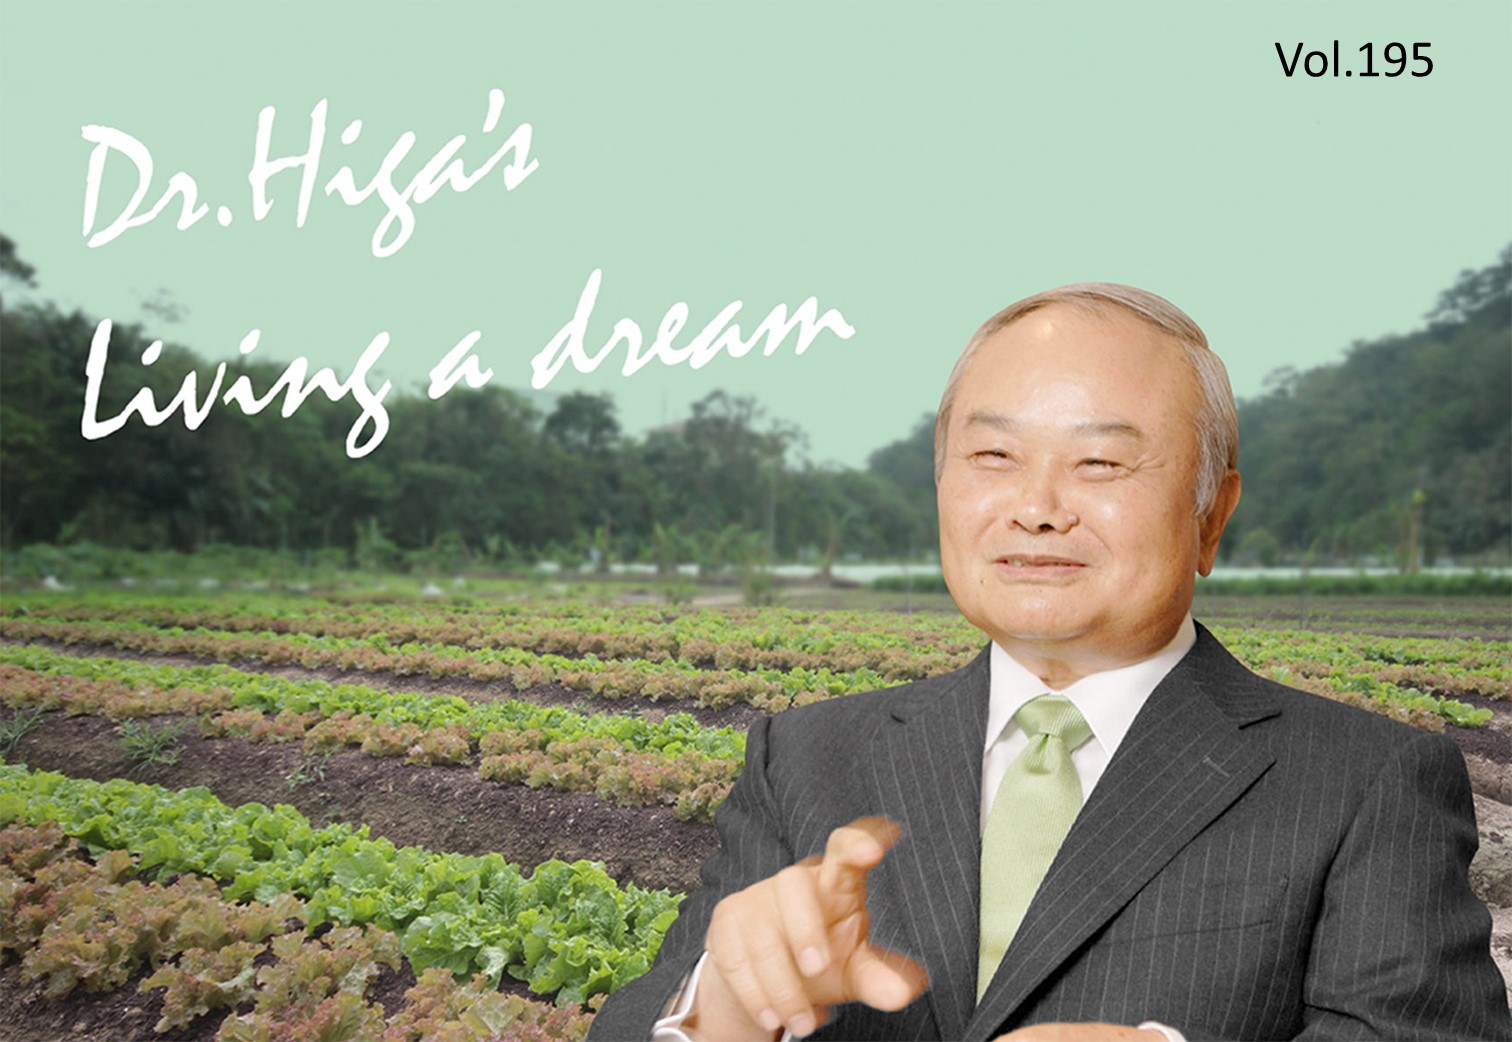 Dr. Higa's "Living a Dream": the latest article #195 is up!!!